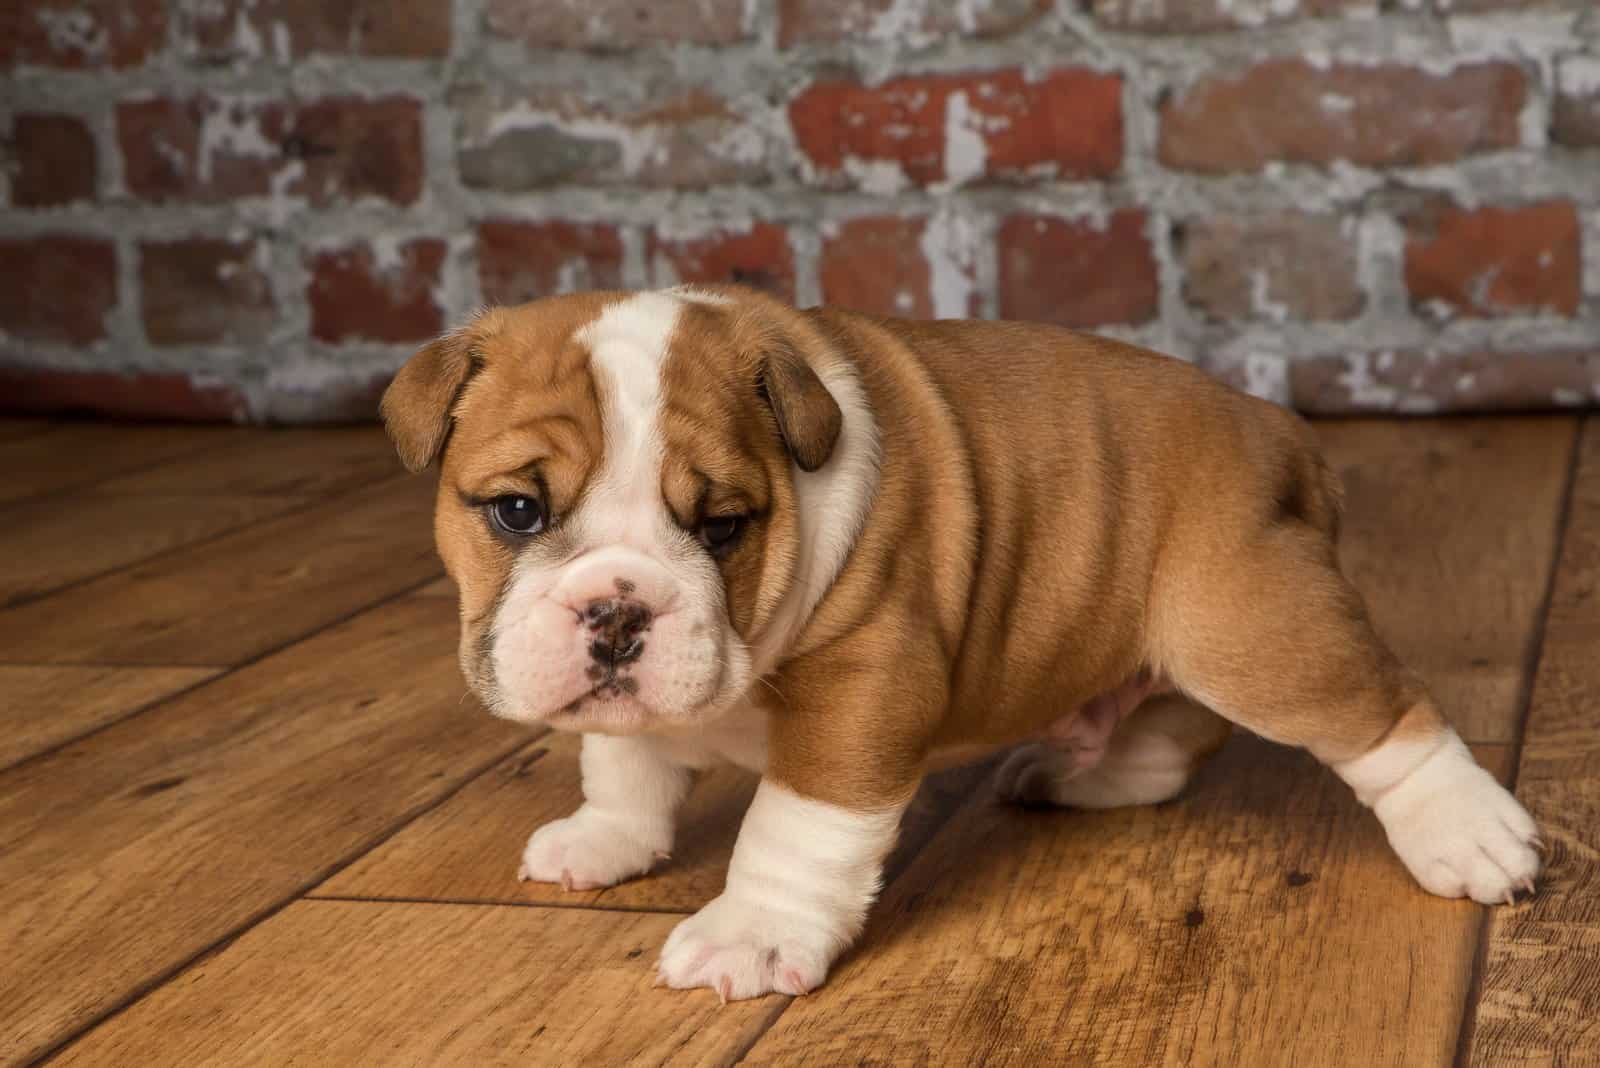 English Bulldog puppy stands on a wooden surface